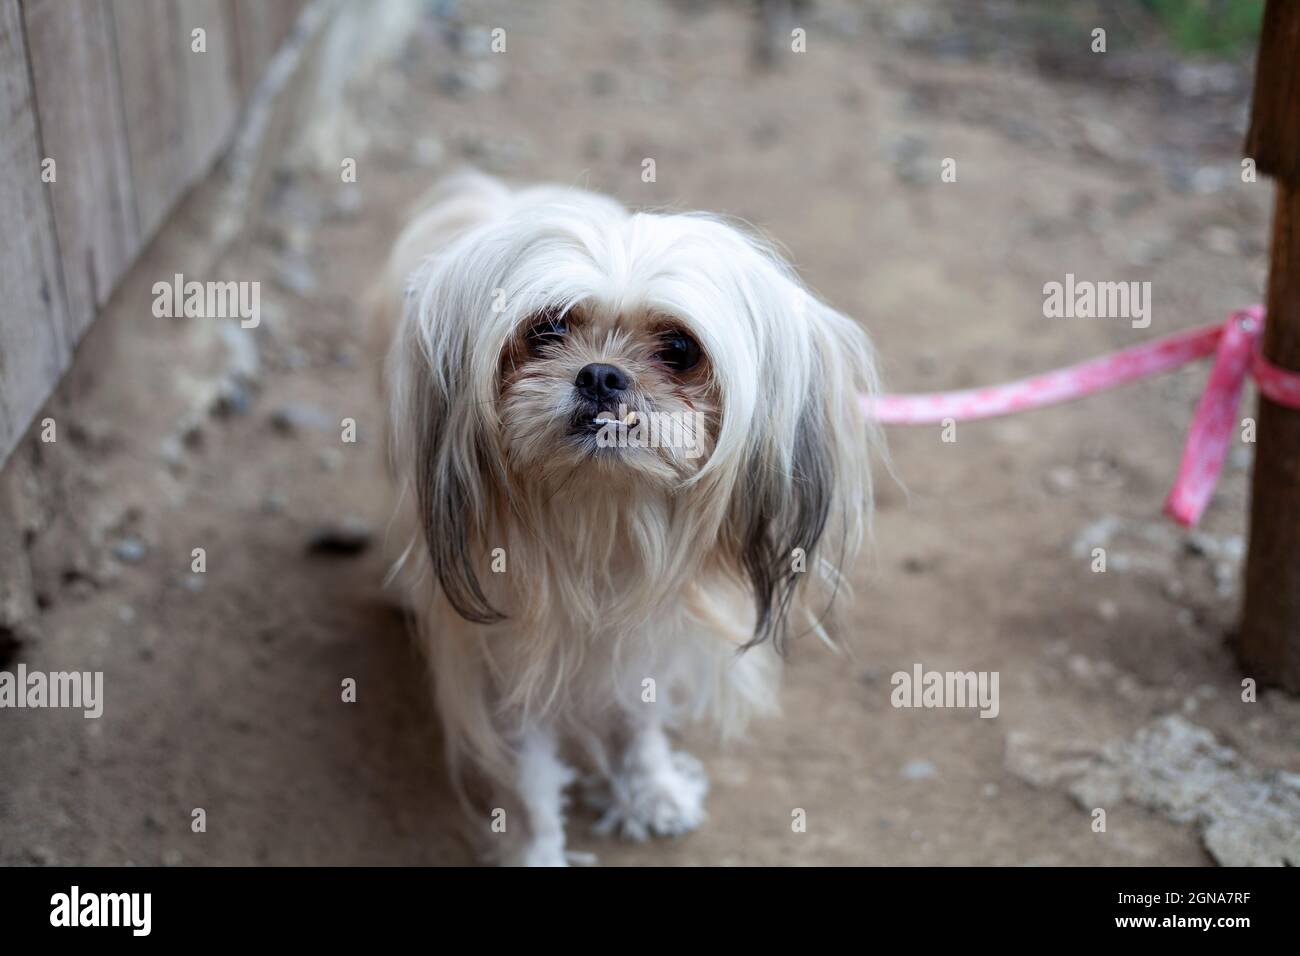 ugly small dog on pink leash pup dog doggy white hair Stock Photo